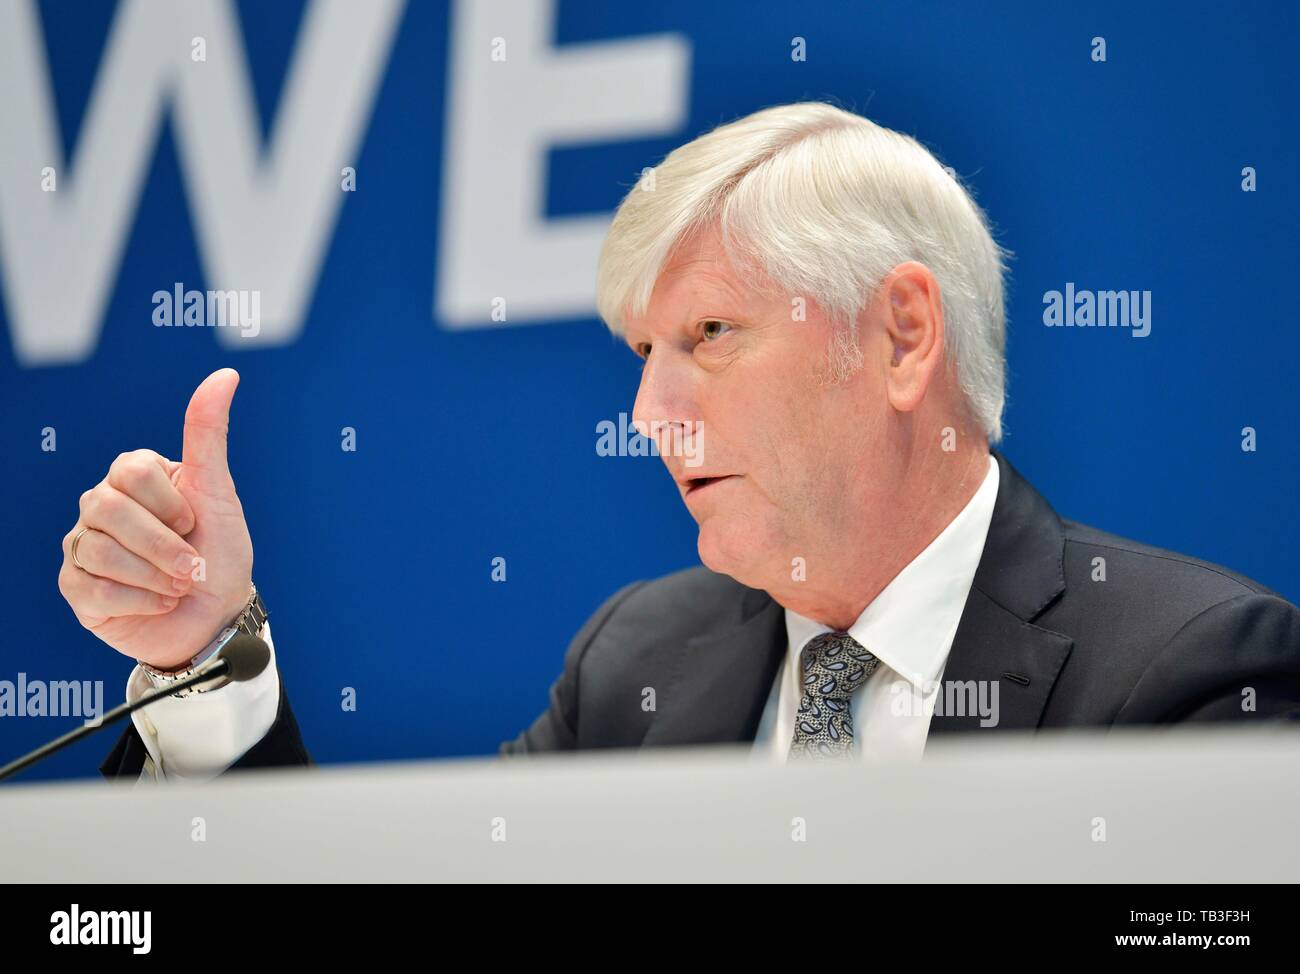 14.03.2019, Essen, North Rhine-Westphalia, Germany - Rolf Martin Schmitz, CEO of RWE AG, gestures during the annual press conference. 0KN190131D022CAR Stock Photo